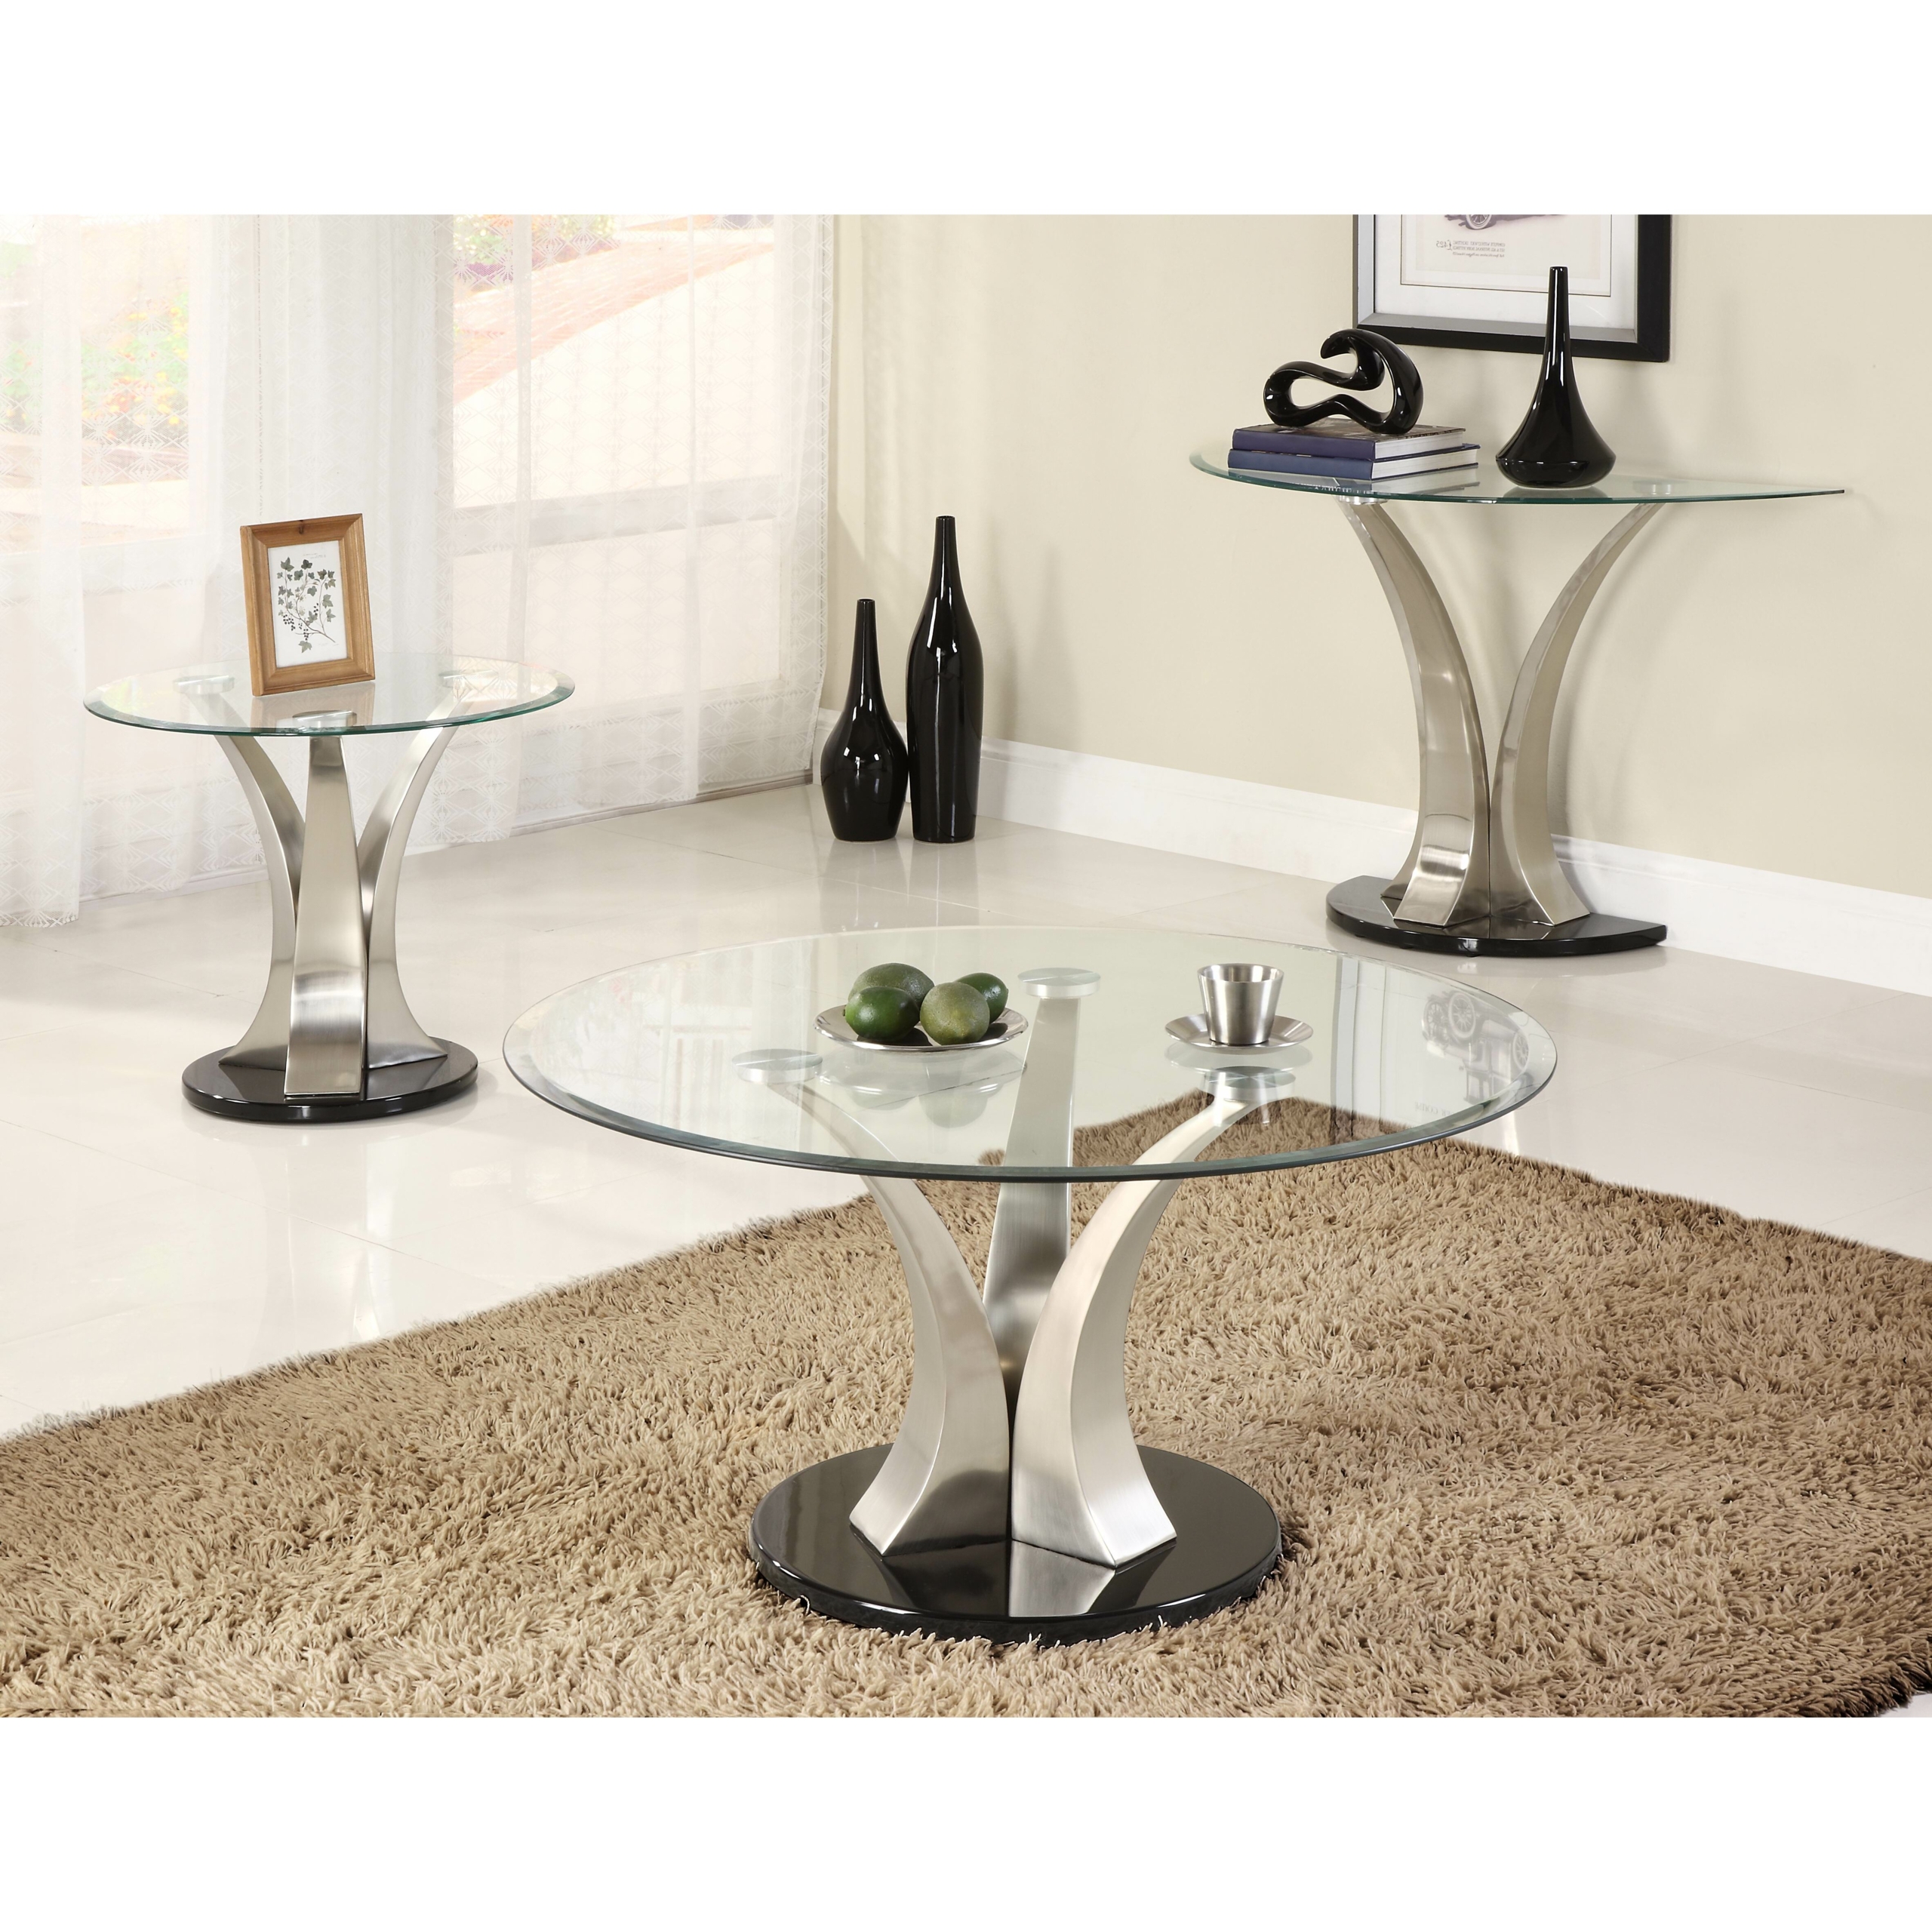 Coffee table bases